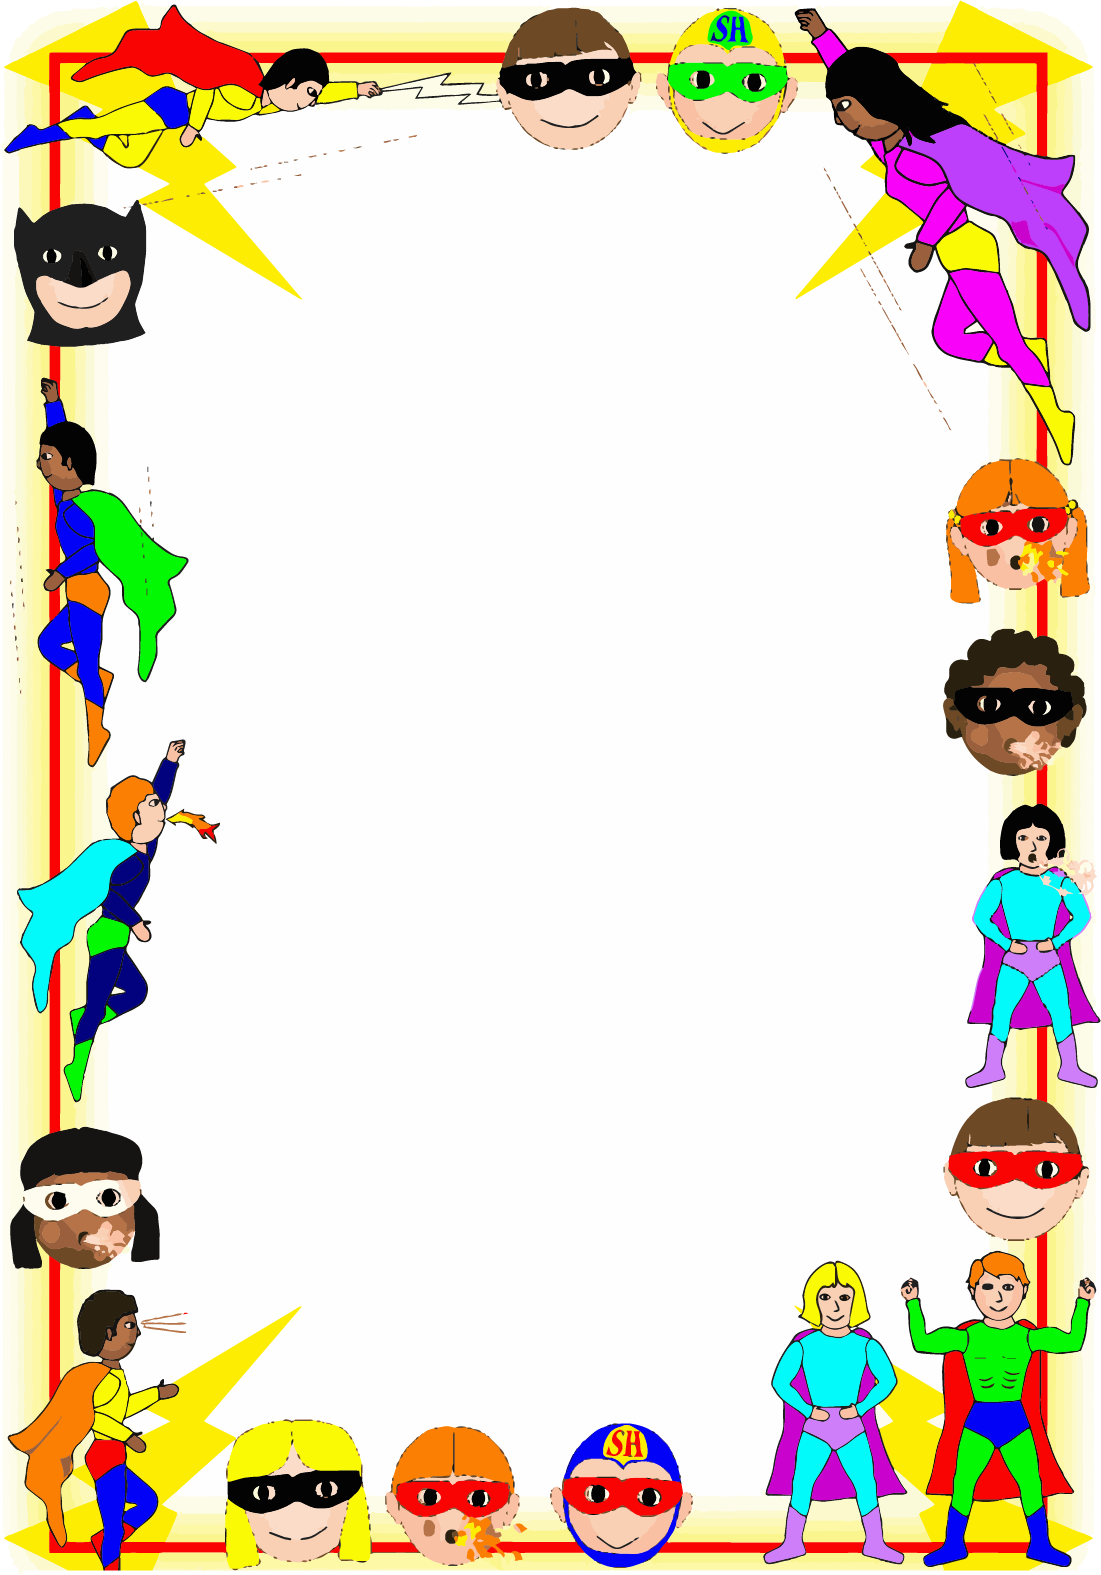 Boarder clipart superhero. A page borders clipartly